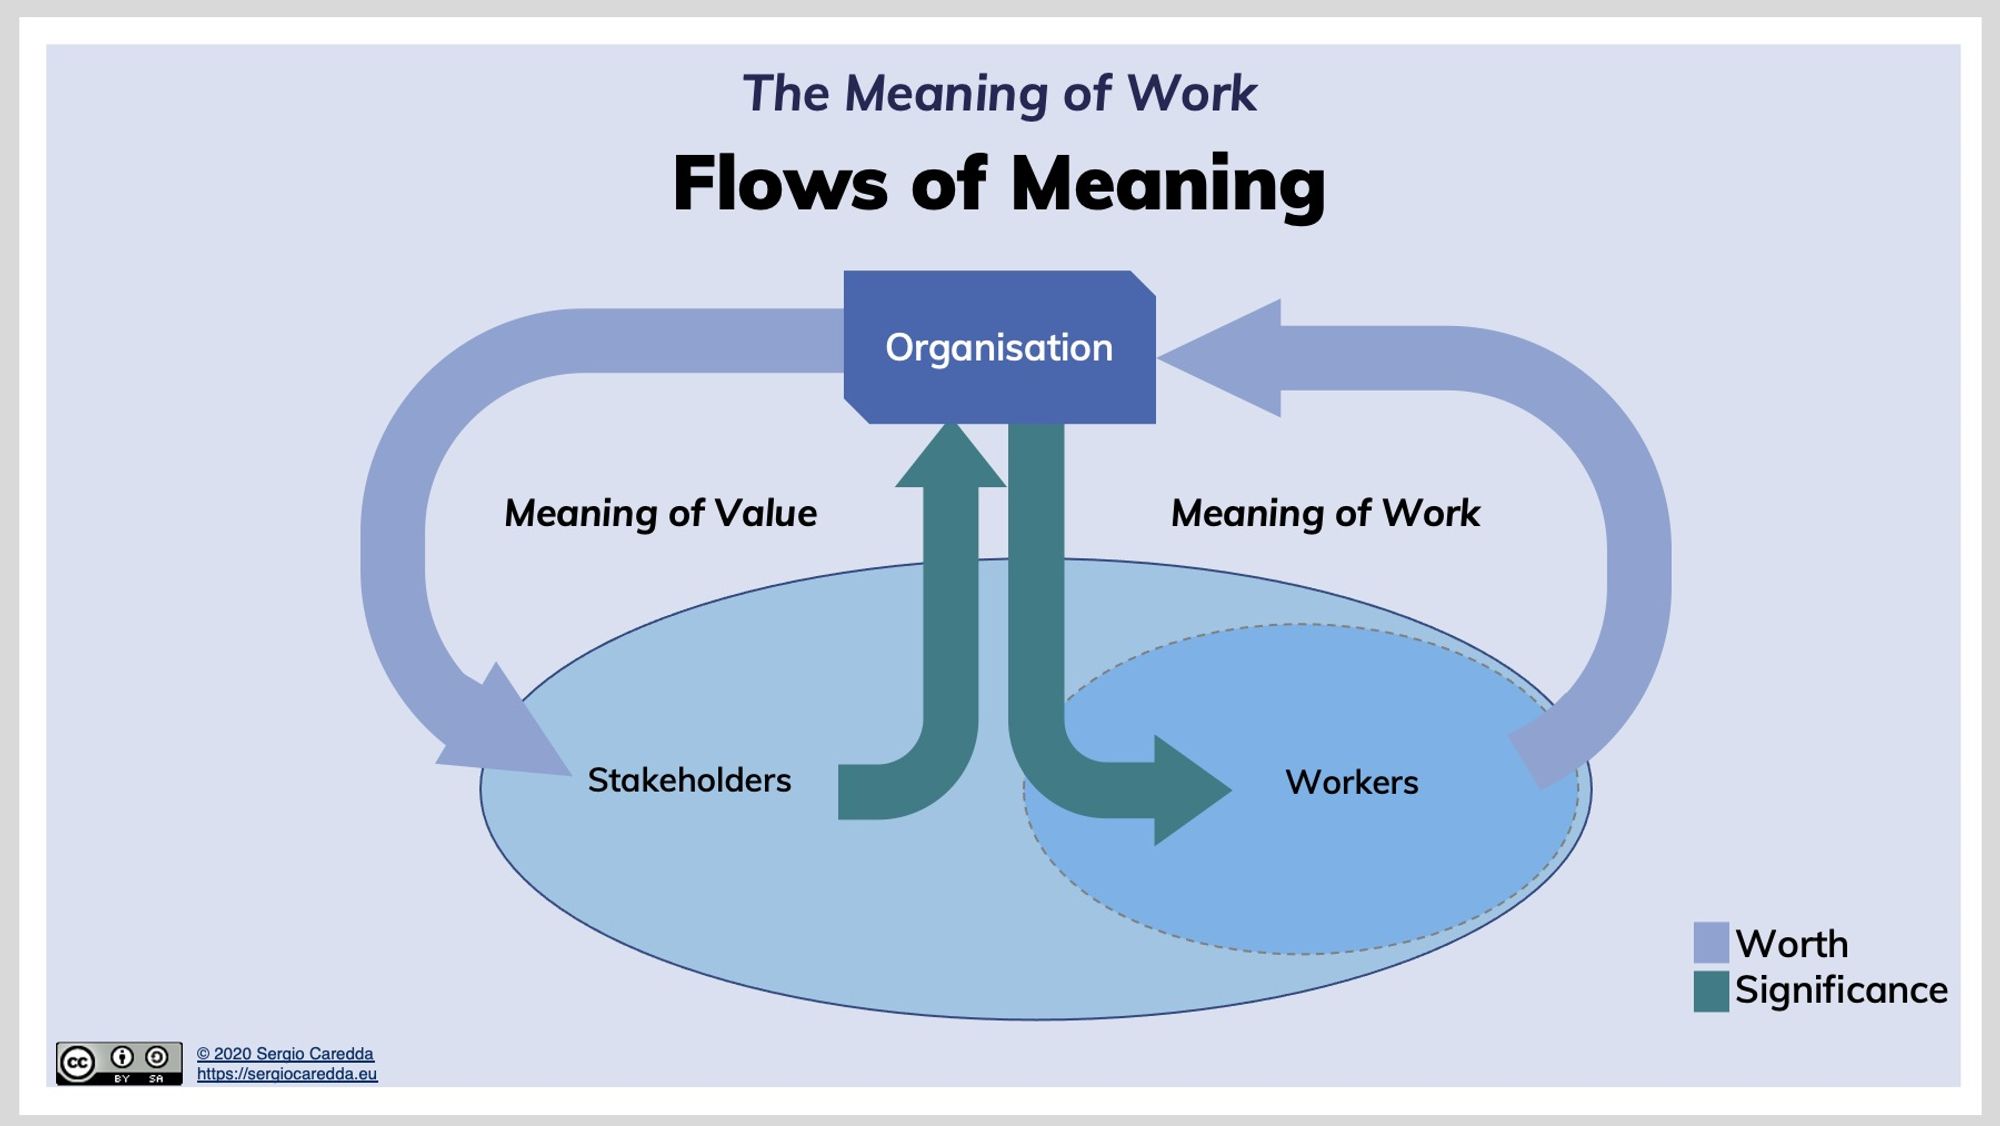 Fig1.: Flows of Meaning that Organisations Trigger